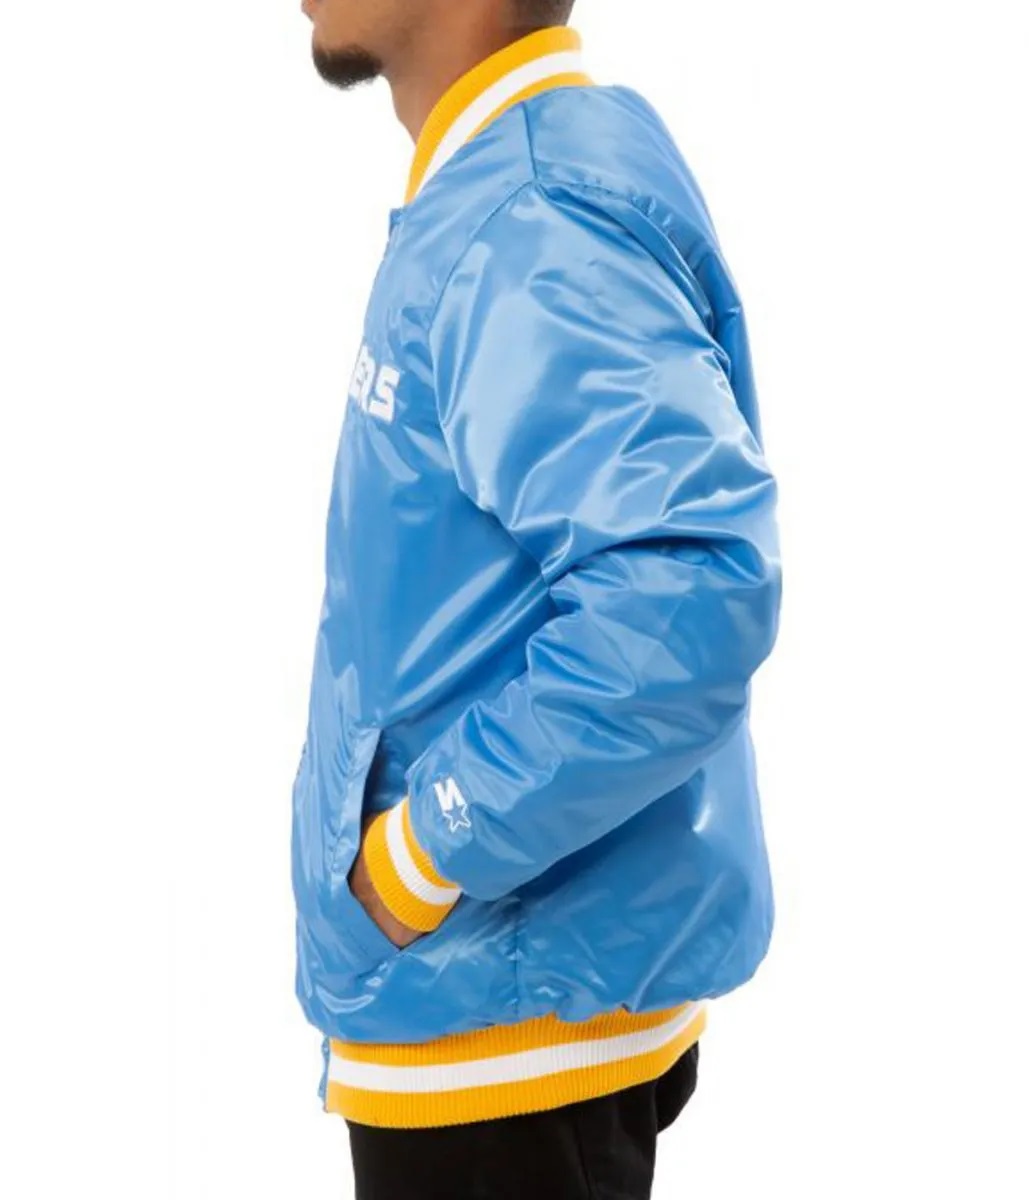 LA Chargers Bomber Blue And White Jacket